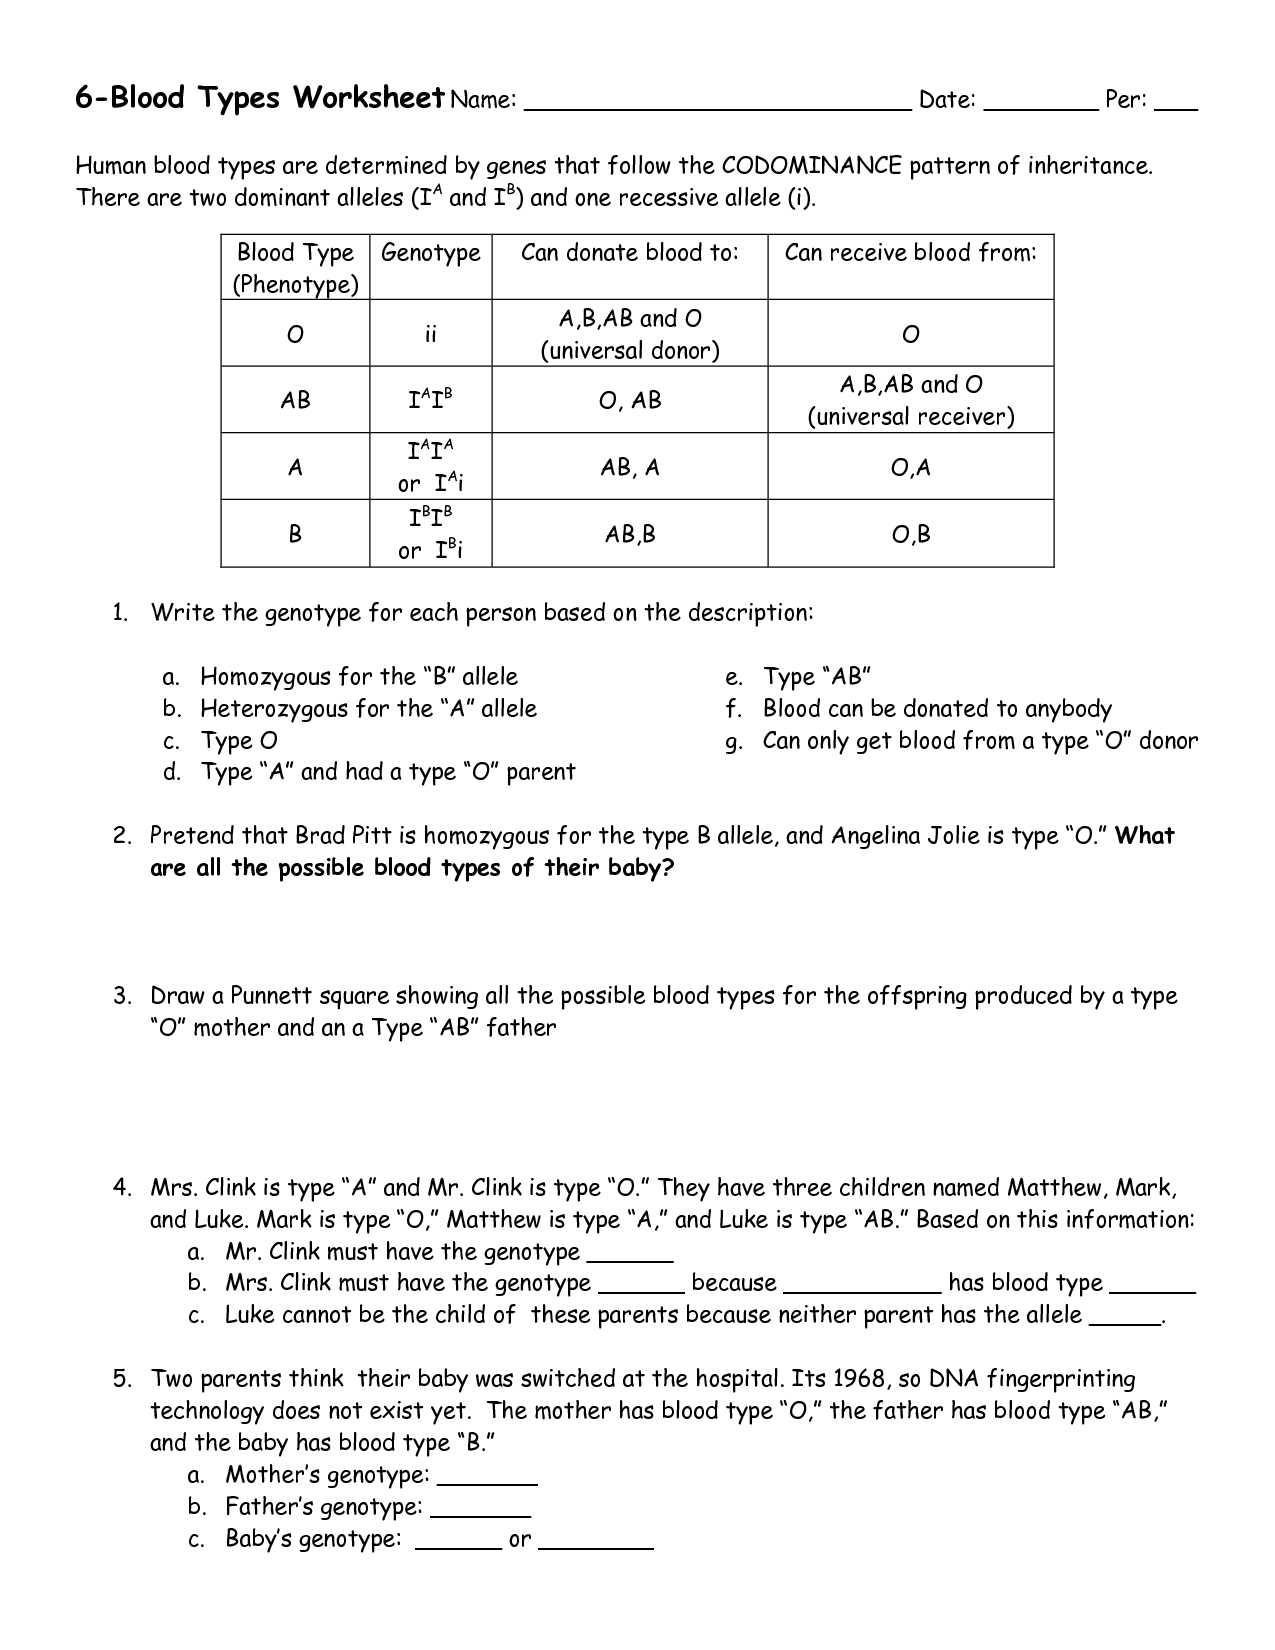 Types Of Chemical Bonds Worksheet as Well as Erfreut Anatomy and Physiology Chapter 10 Blood Worksheet Answers